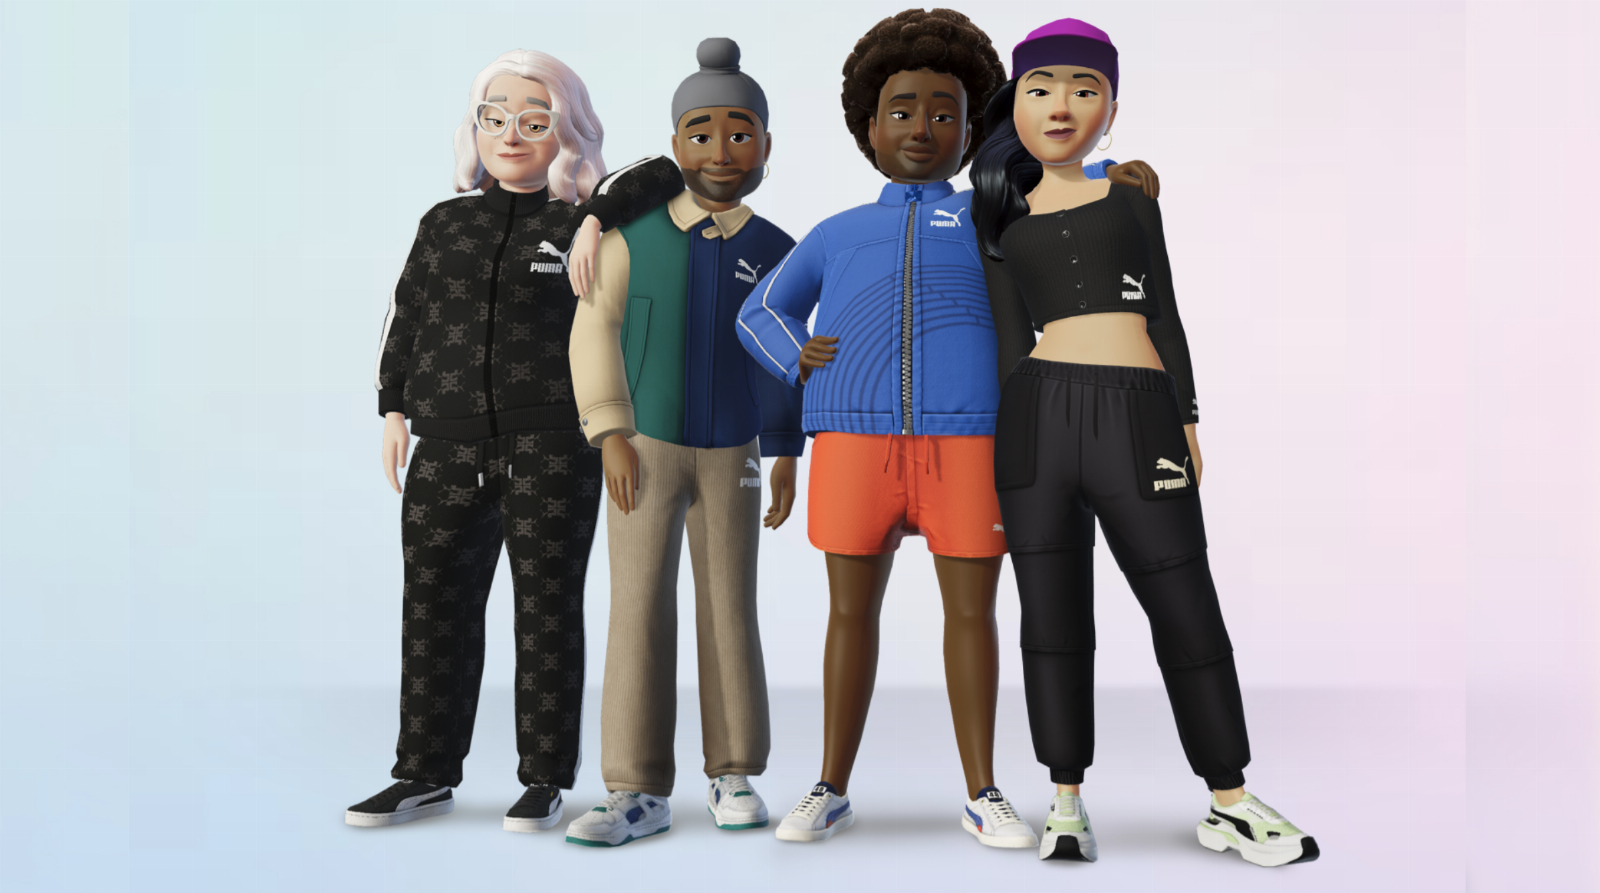 Meta updates its avatars with new body shapes, hair and clothing